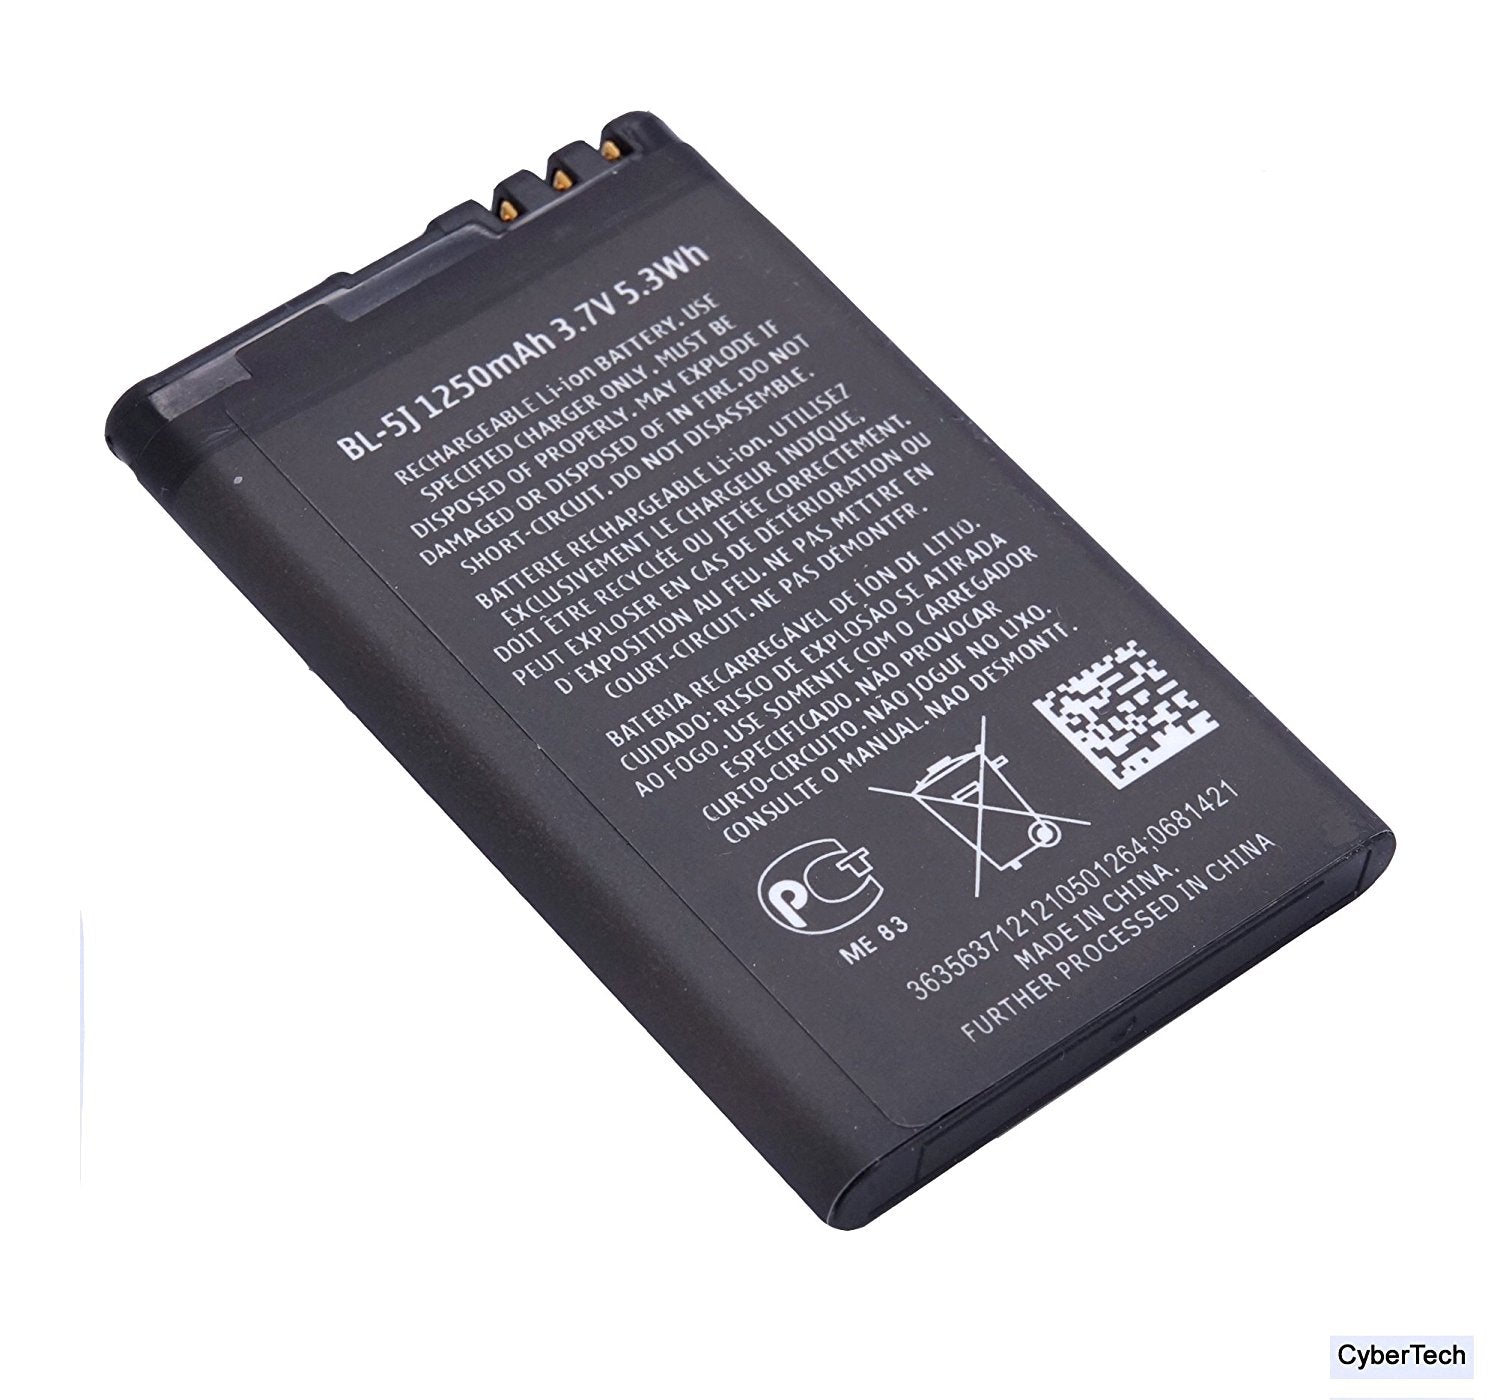 CyberTech High Capacity Replacement Battery for Nokia Windows 8 Mobile Phone Lumia 521 for T-Mobile